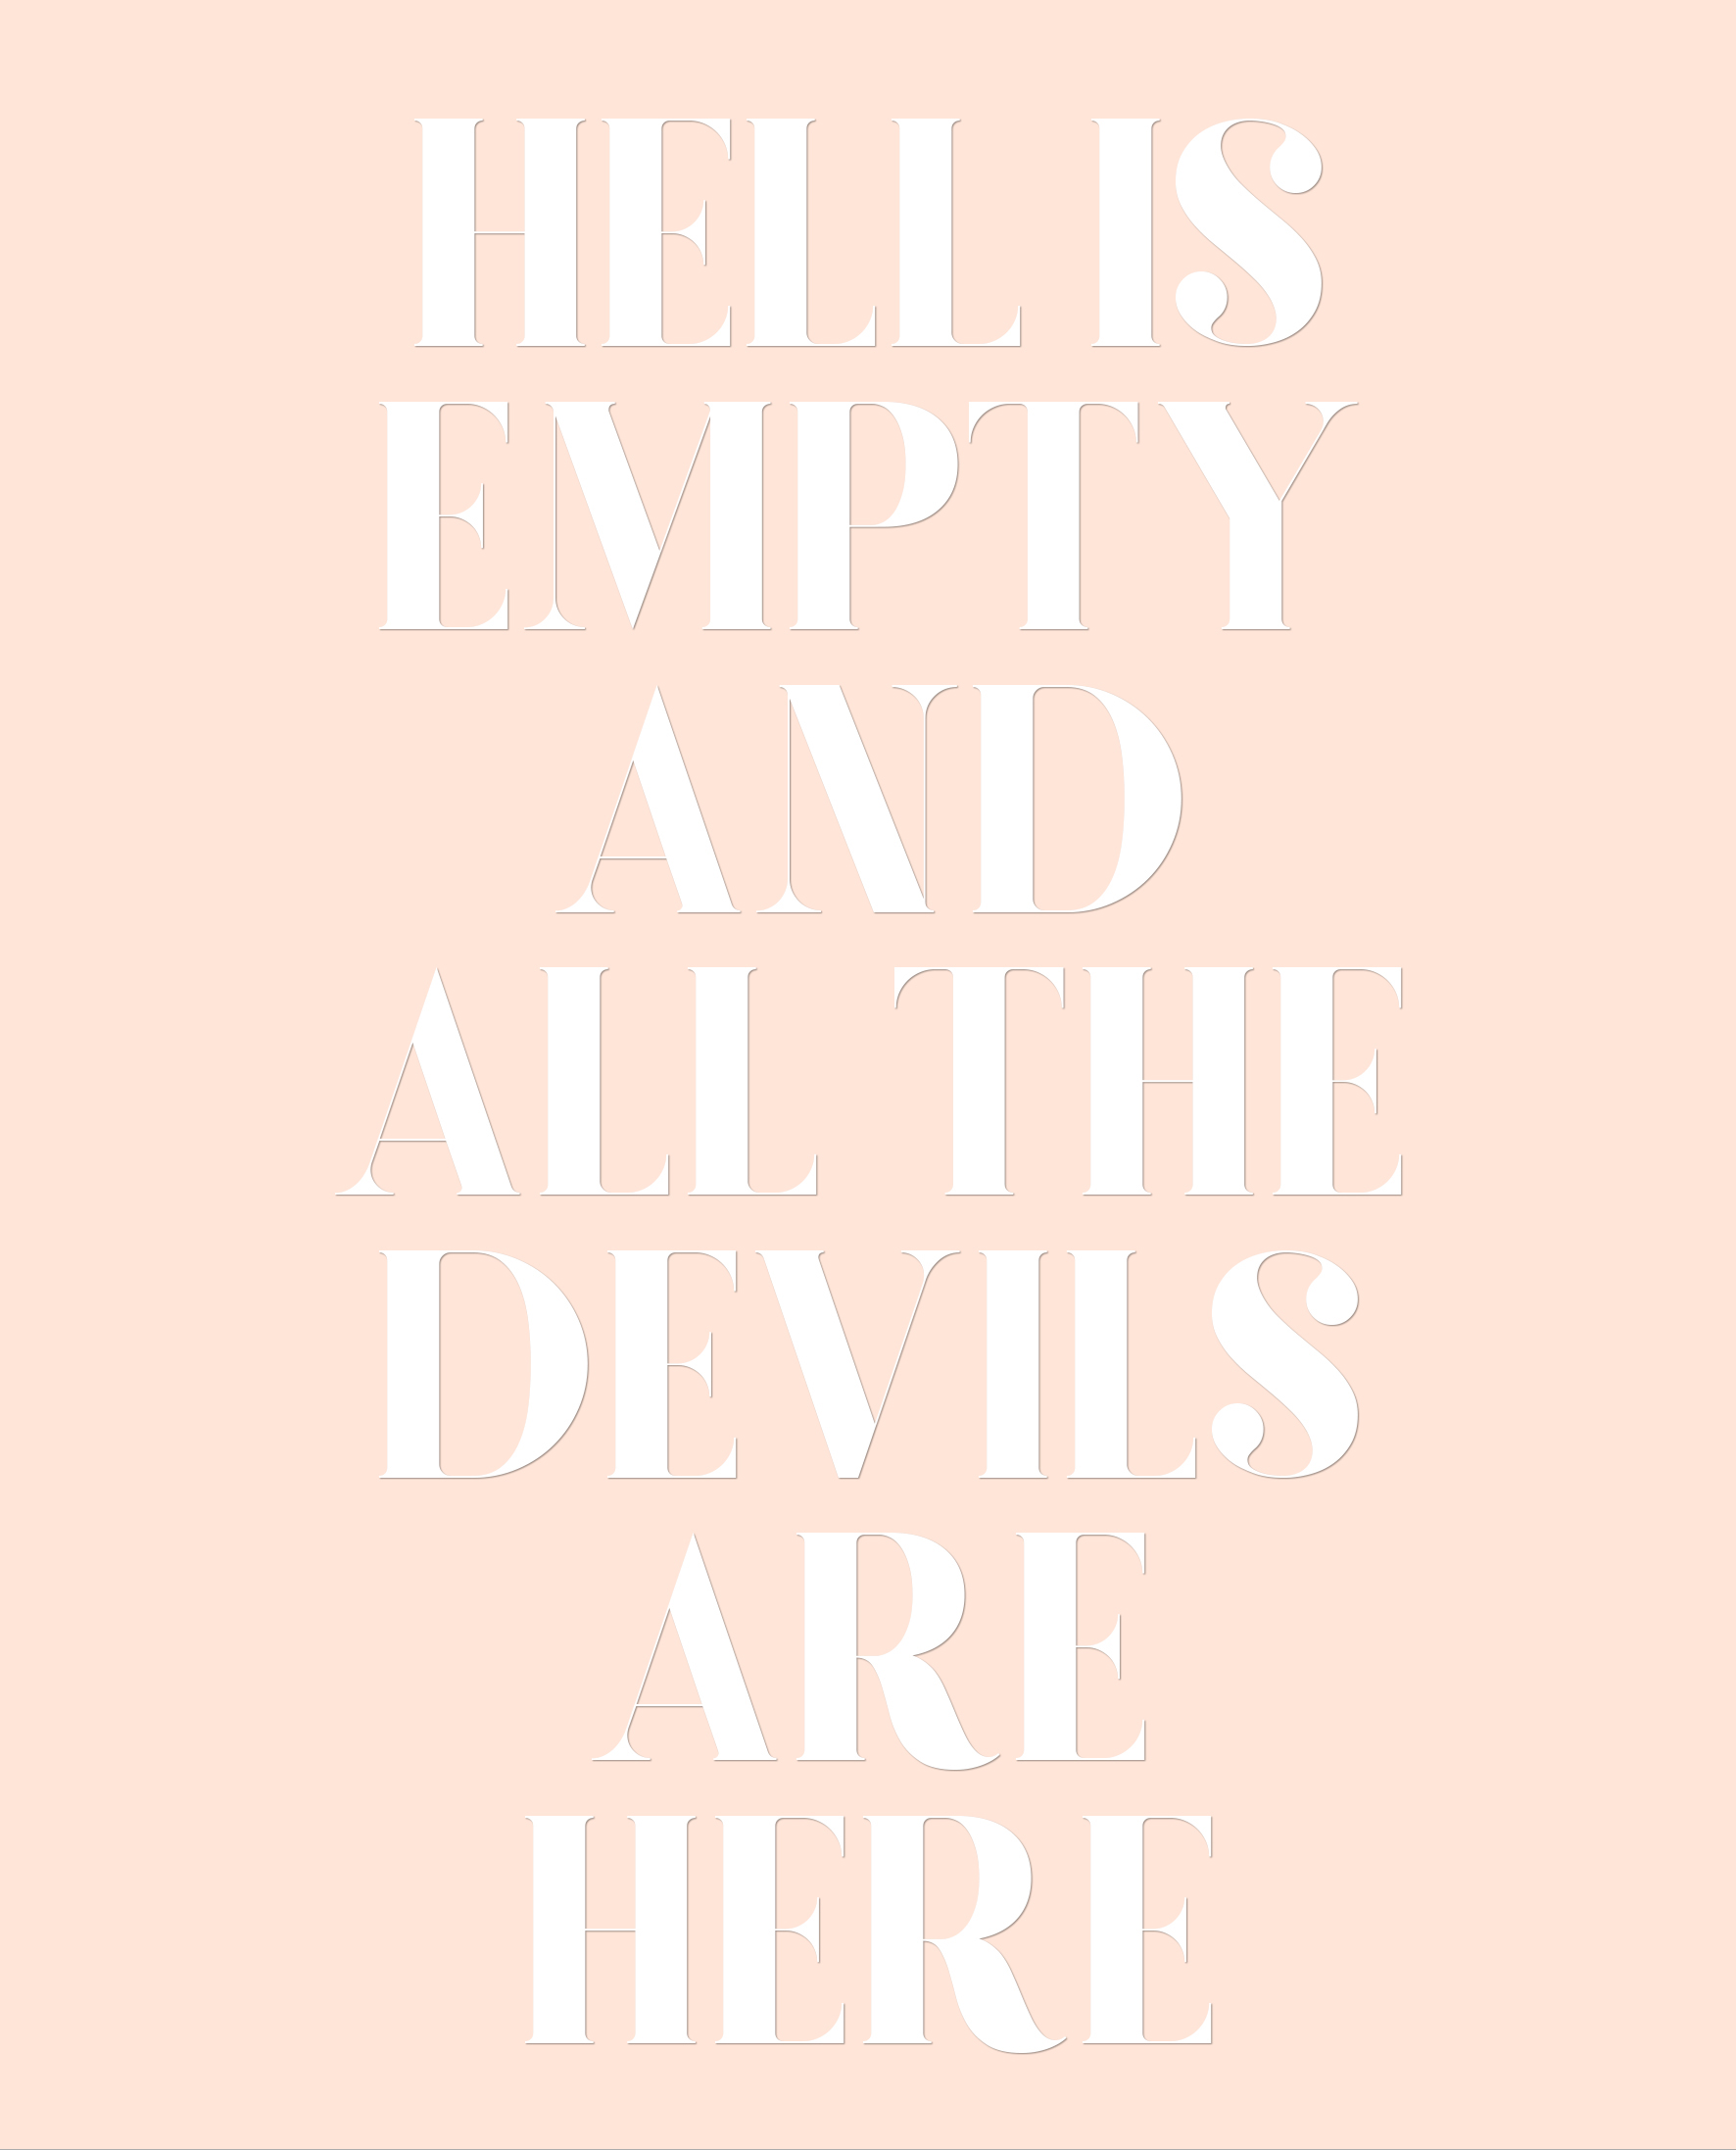 Light peach background with white font.